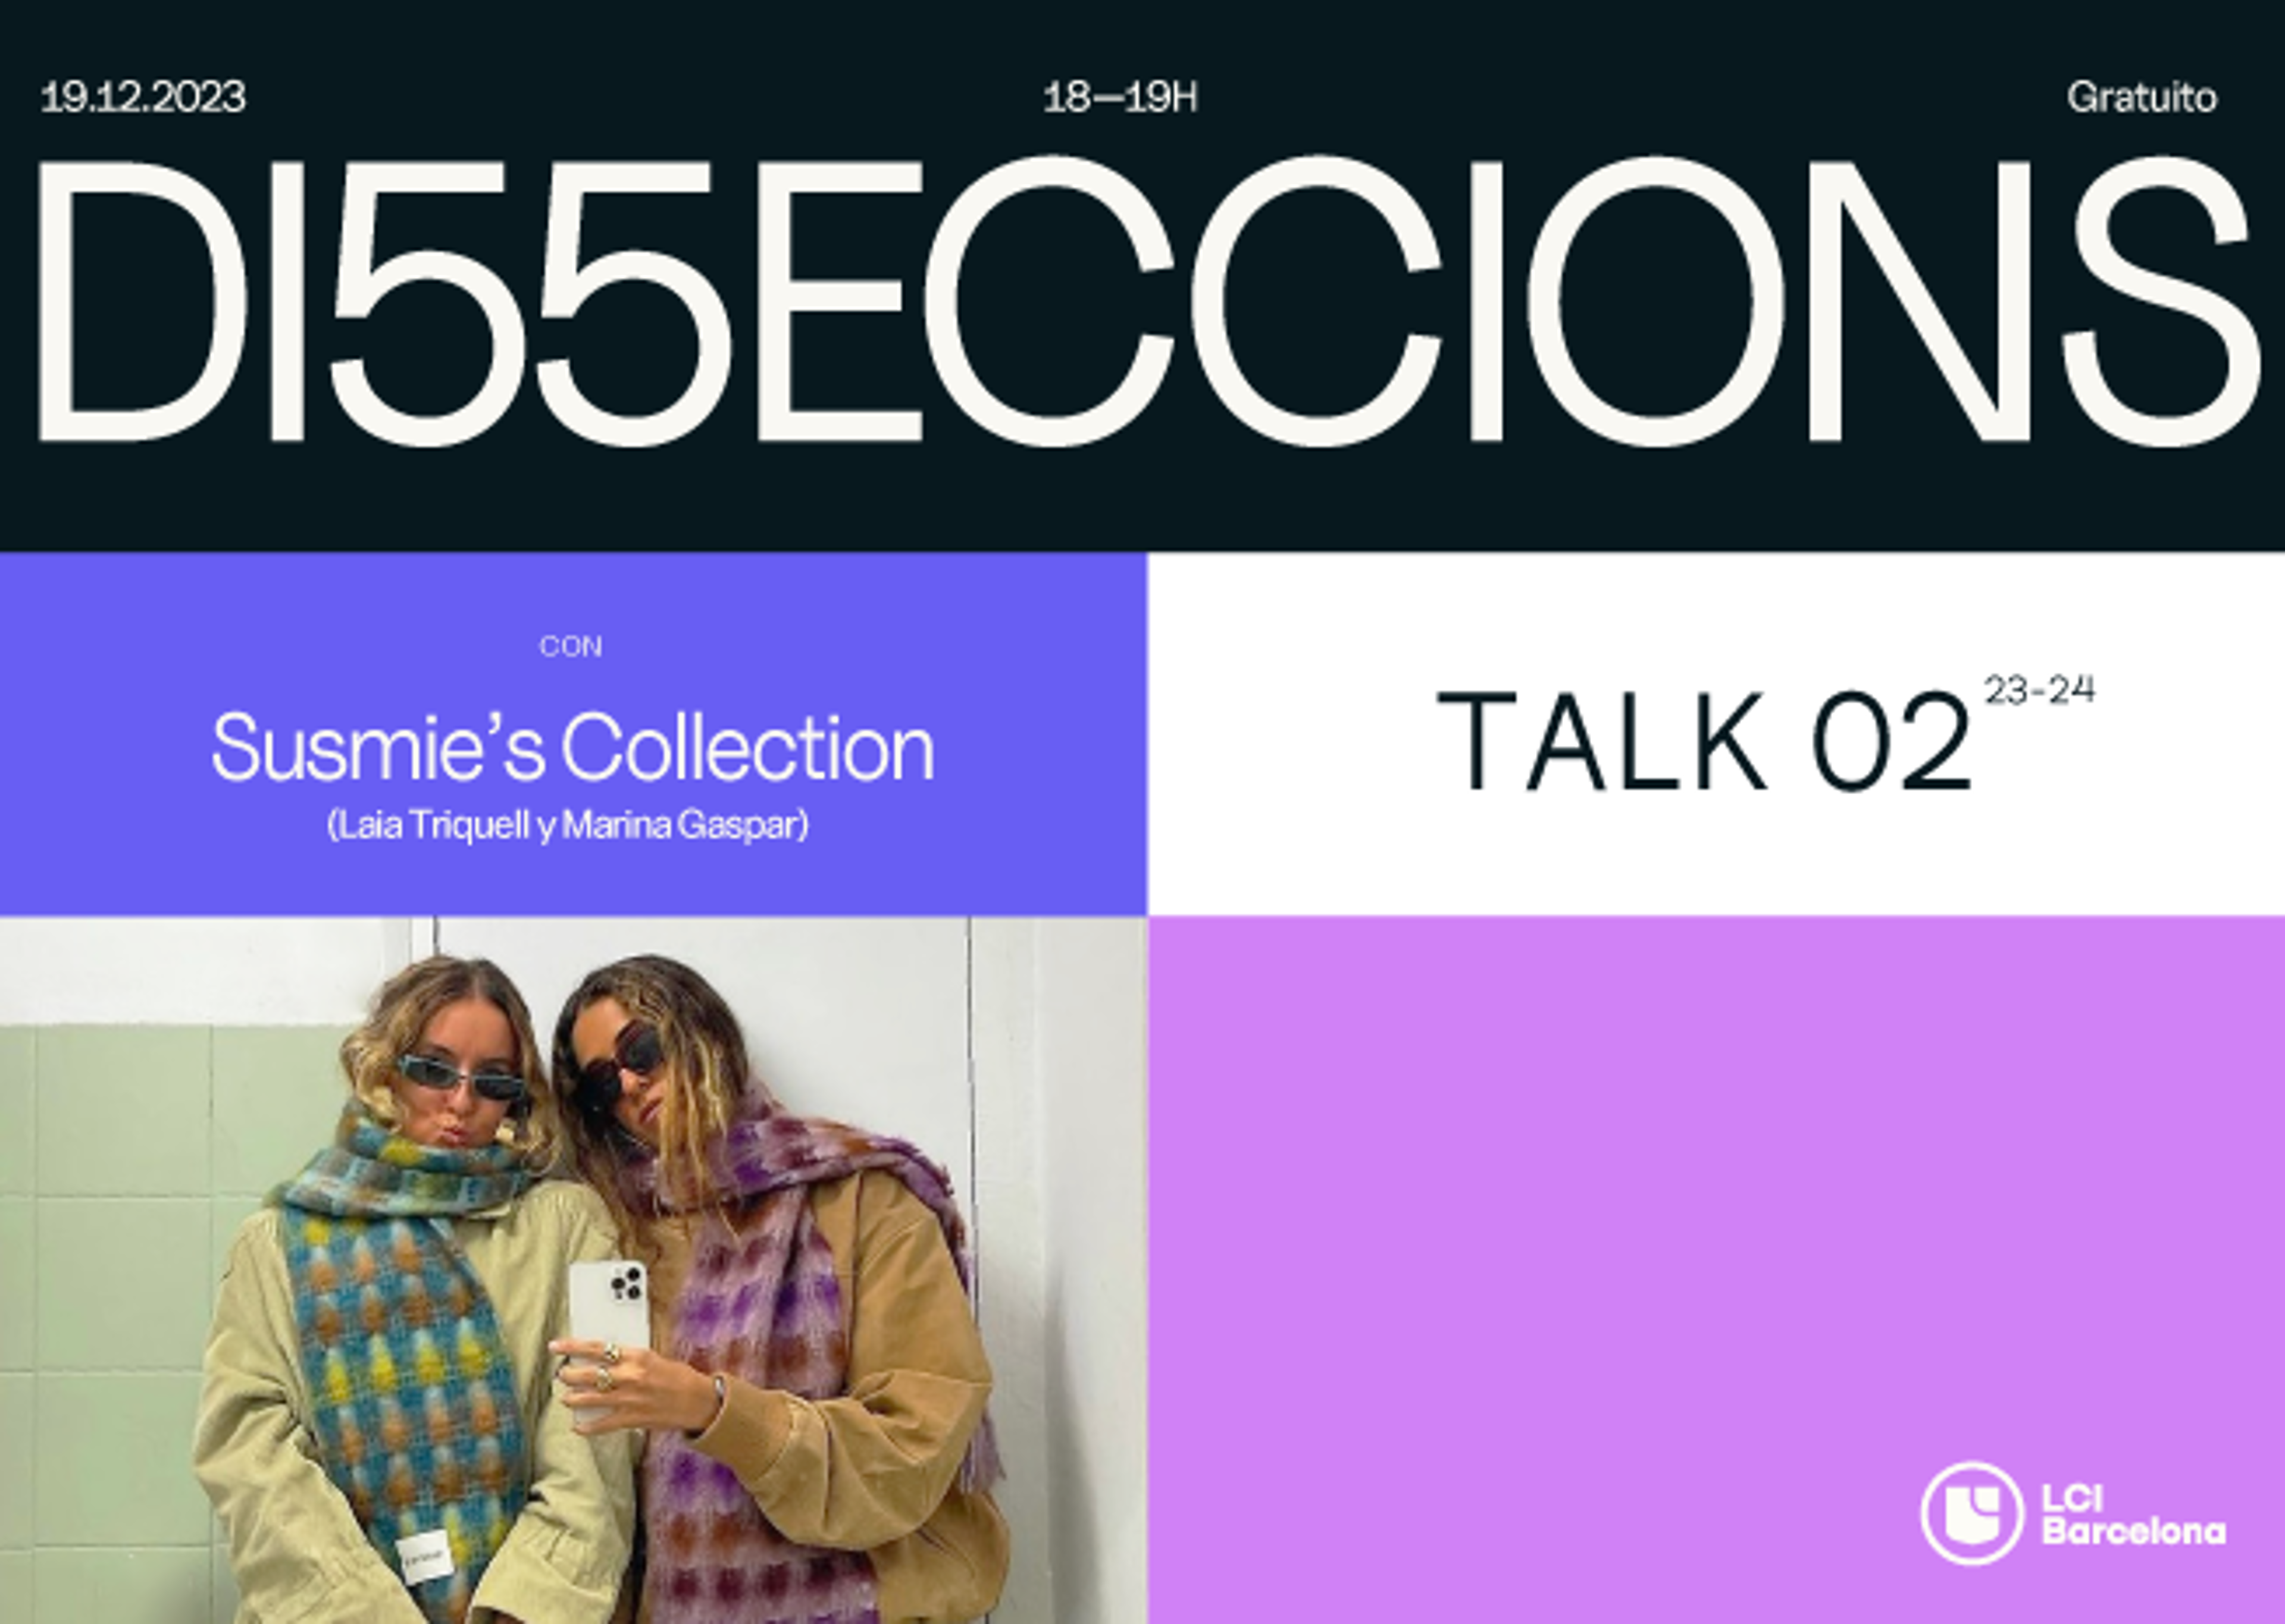 Promotional graphic for 'D15ECCIONS' event on 19.12.2023 featuring 'Susmie’s Collection' talk, showing two women taking a selfie.